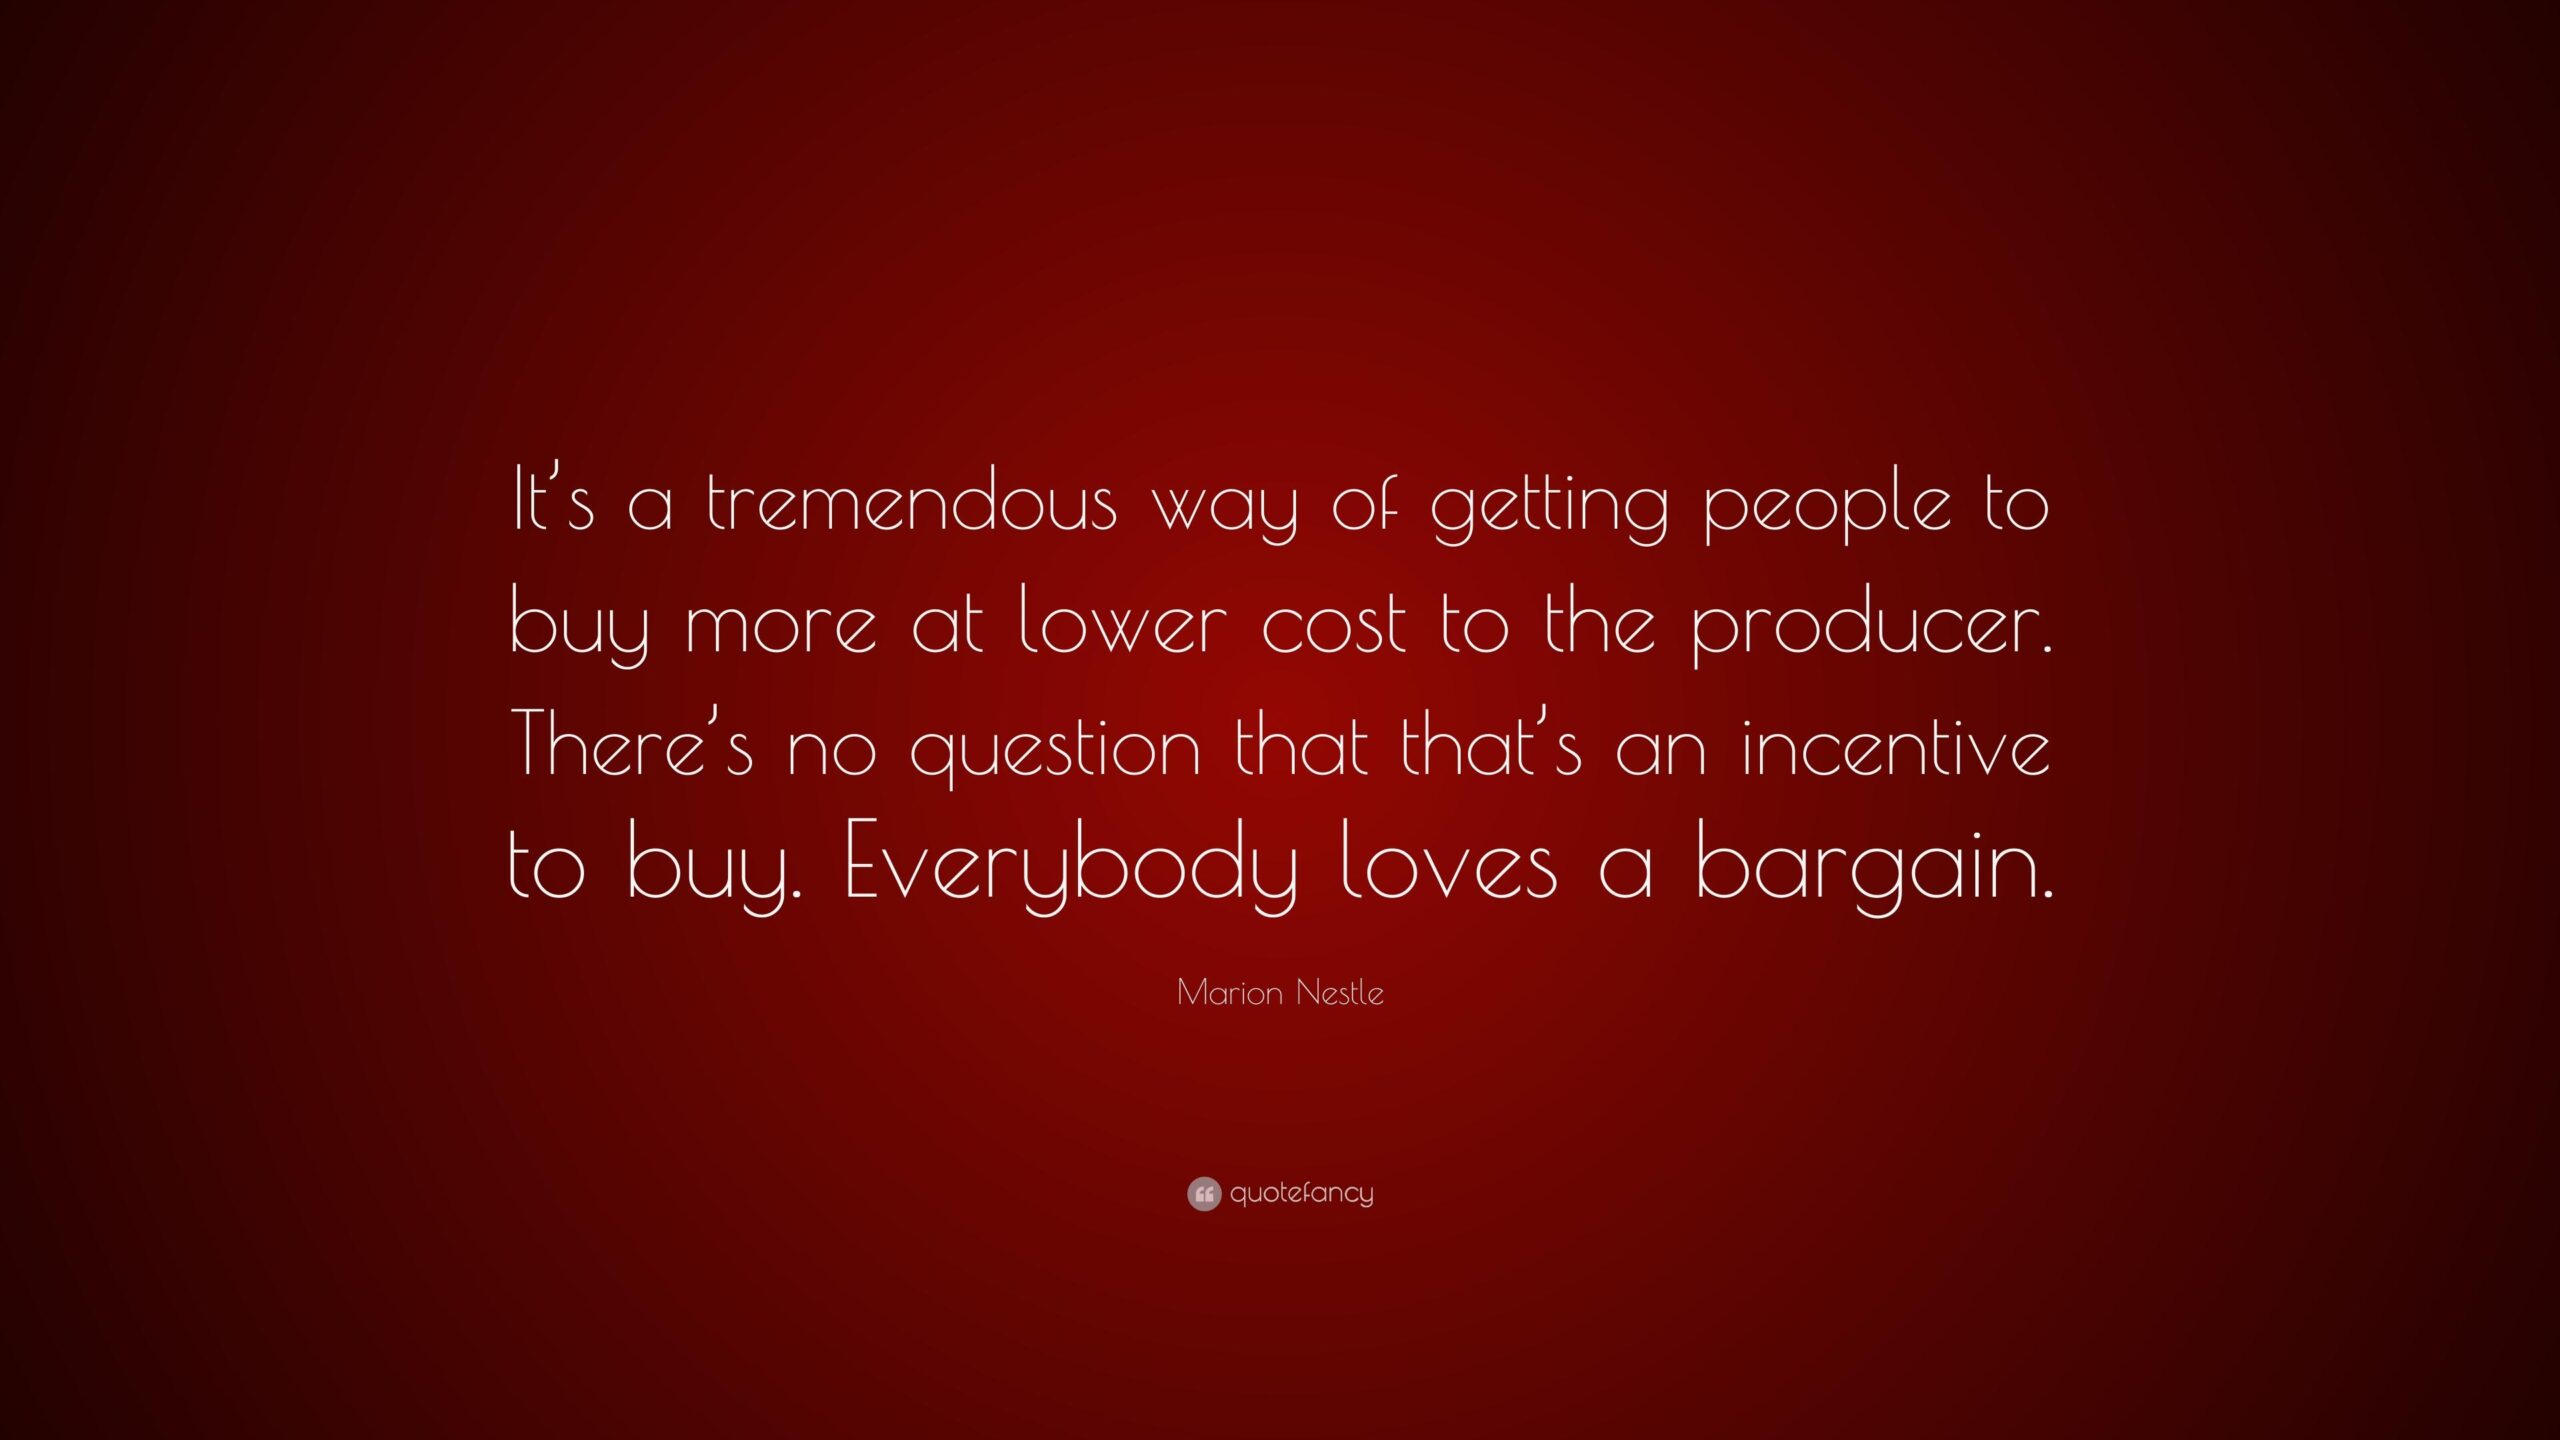 Marion Nestle Quote “It’s a tremendous way of getting people to buy